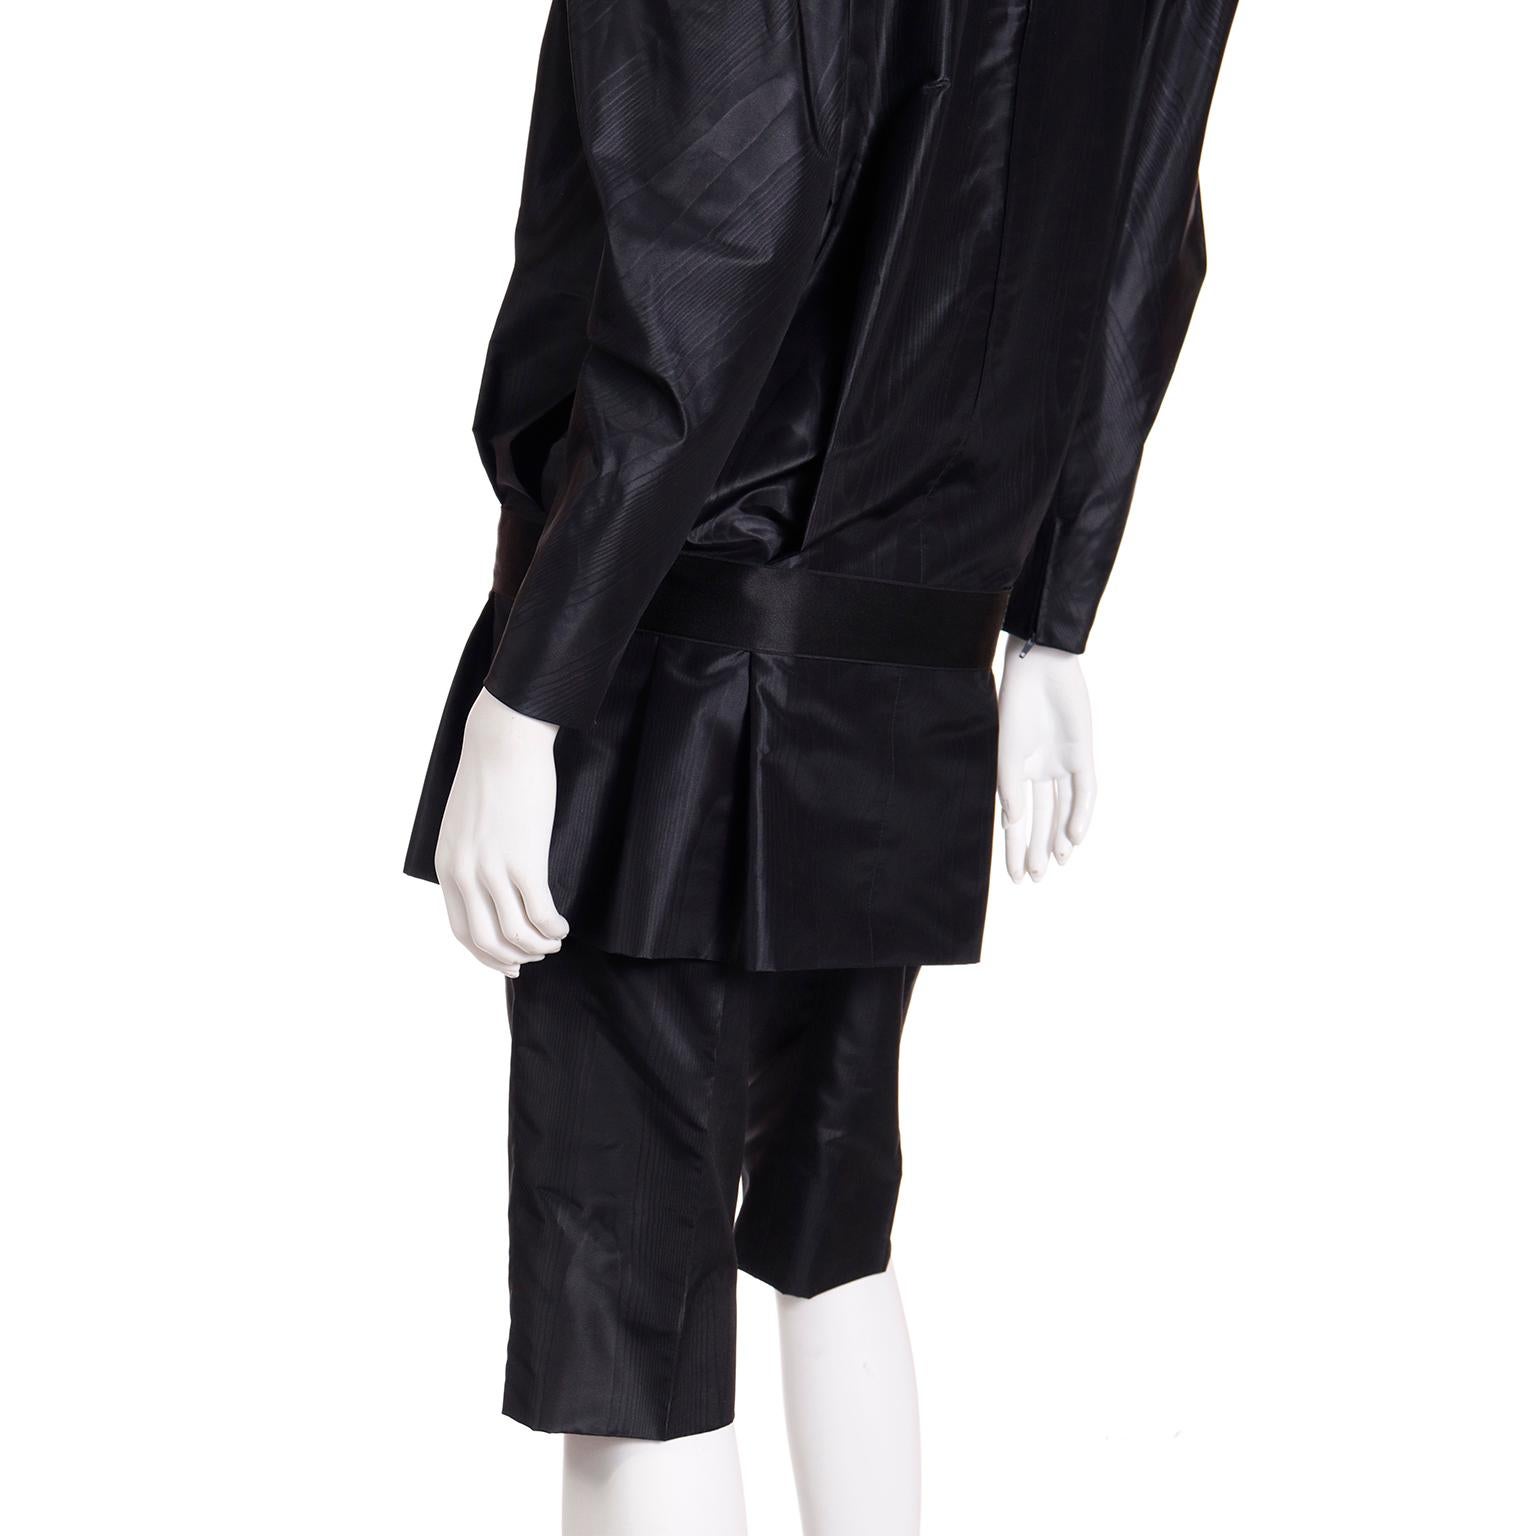 Givenchy Haute Couture Vintage 1980s Black Satin Shorts & Top Outfit 1